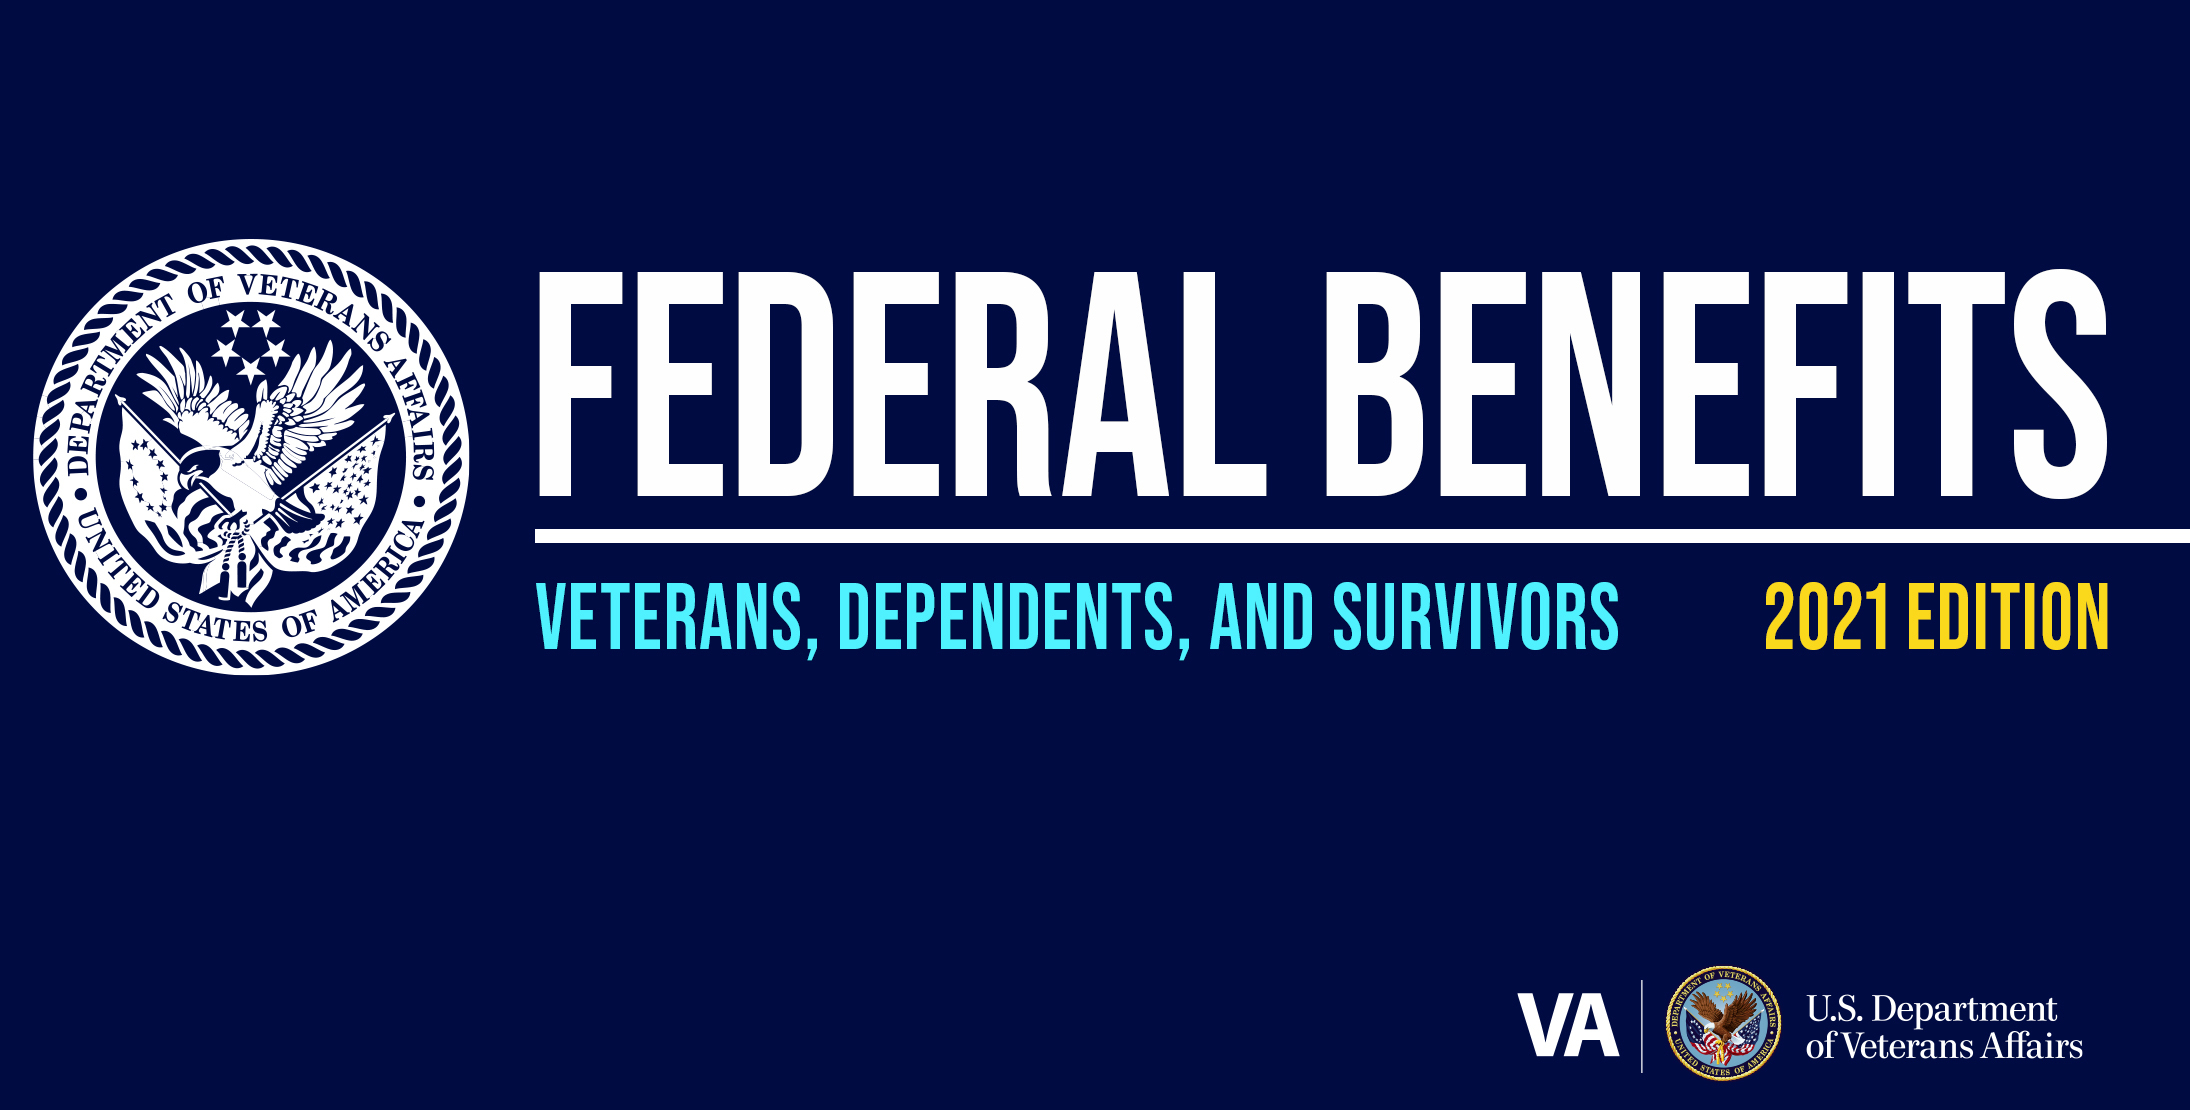 Veterans, family members have single page to get started for VA